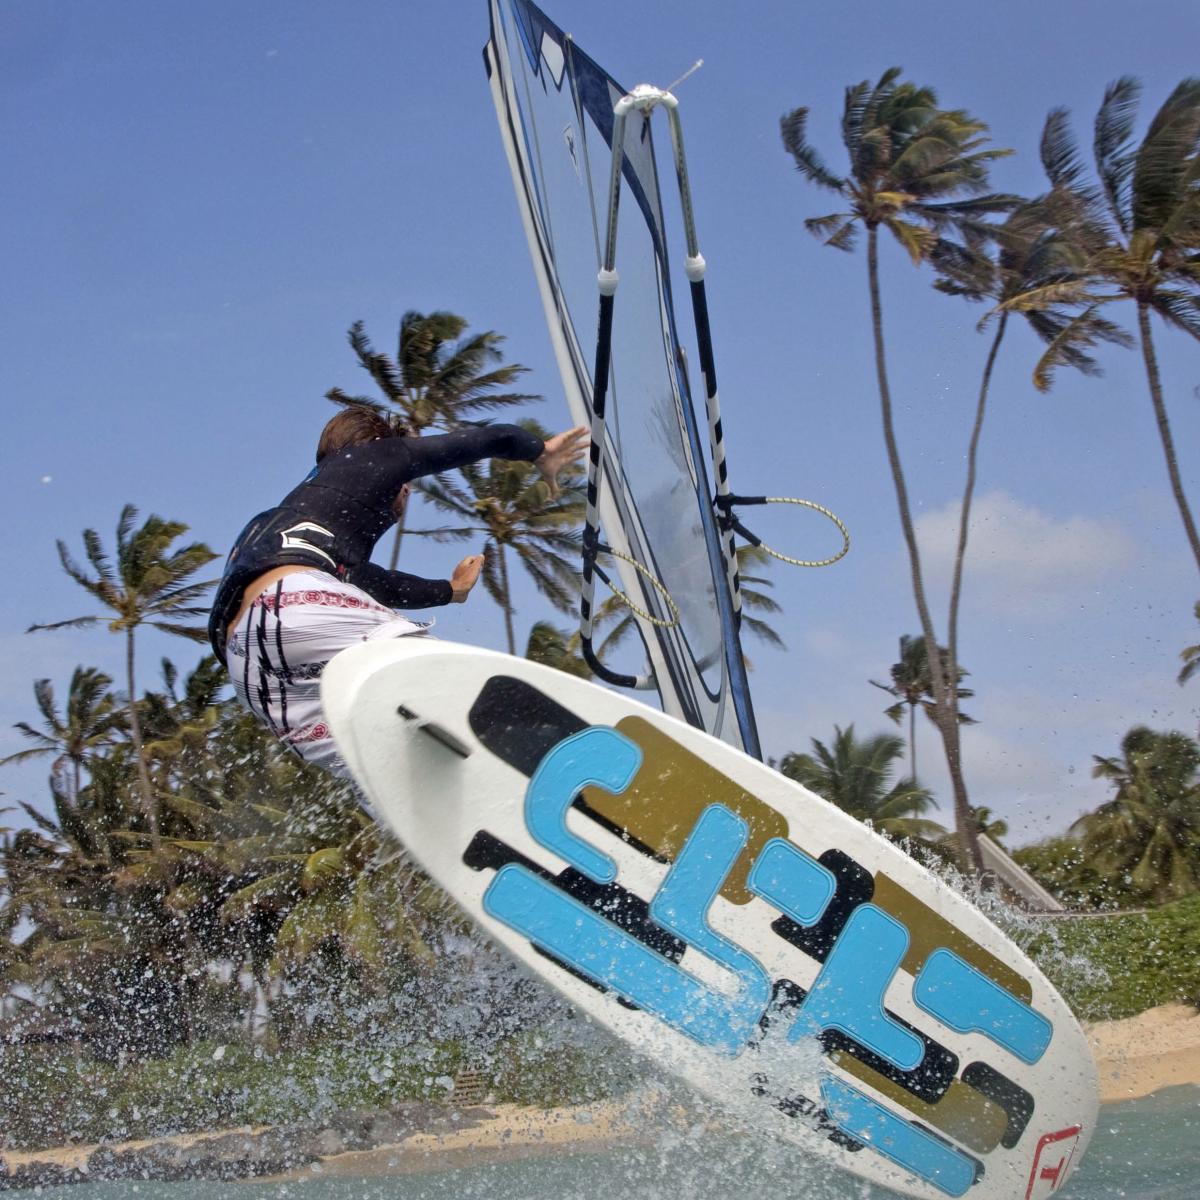 The 3 Style from Tabou board is tripple fun in only one surfboard.